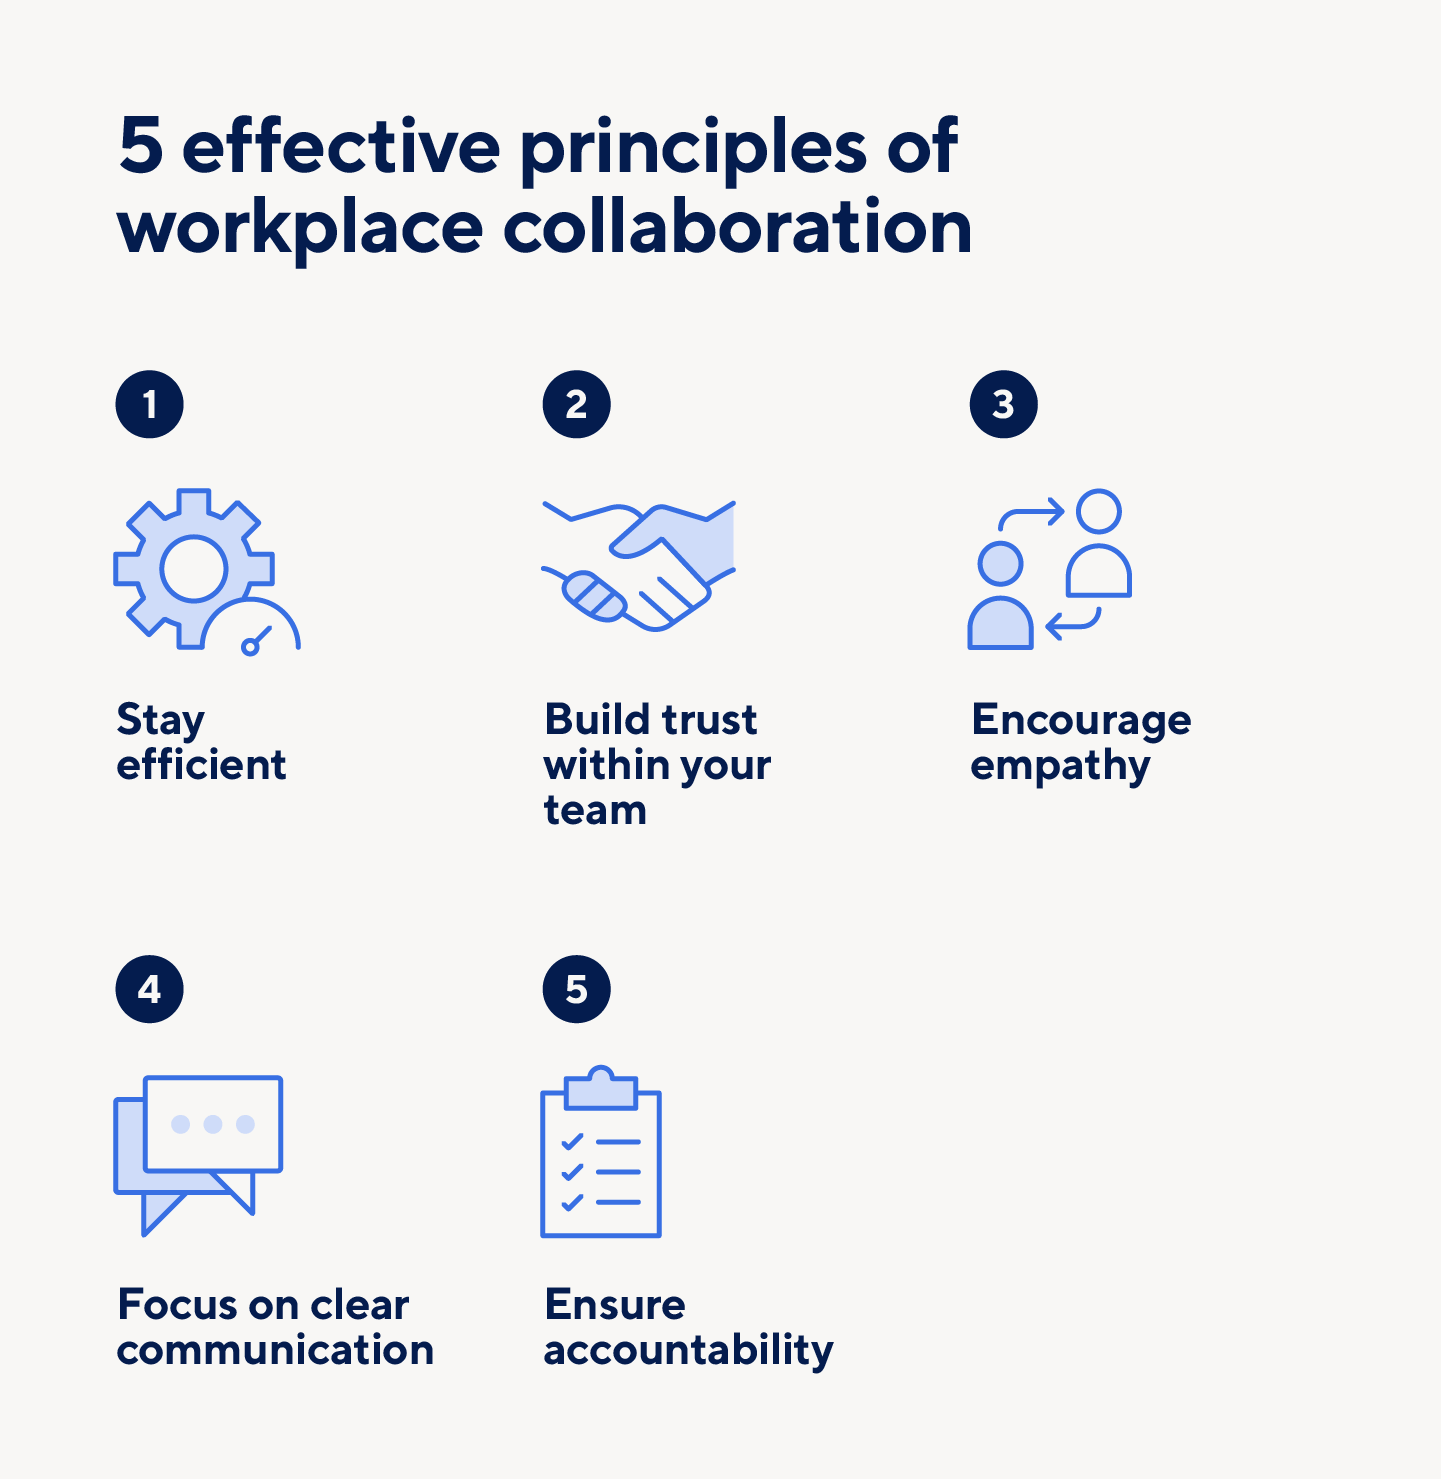 Efficiency, trust, empathy, communication, and accountability are the five principles of workplace collaboration.